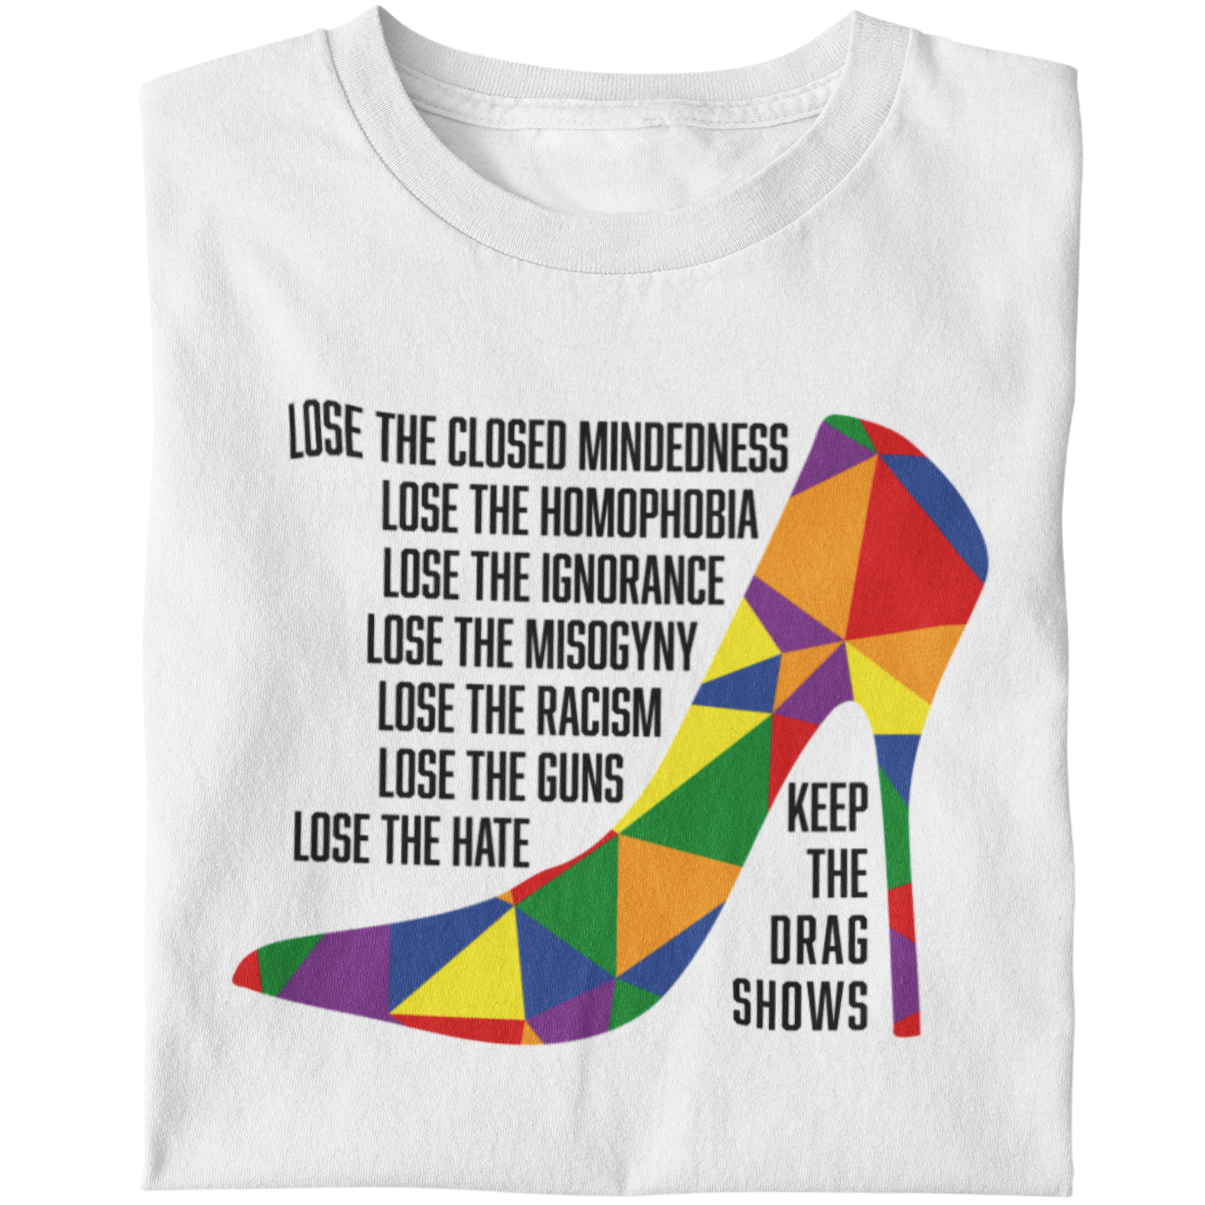 Keep the Drag Shows - Unisex T-Shirt